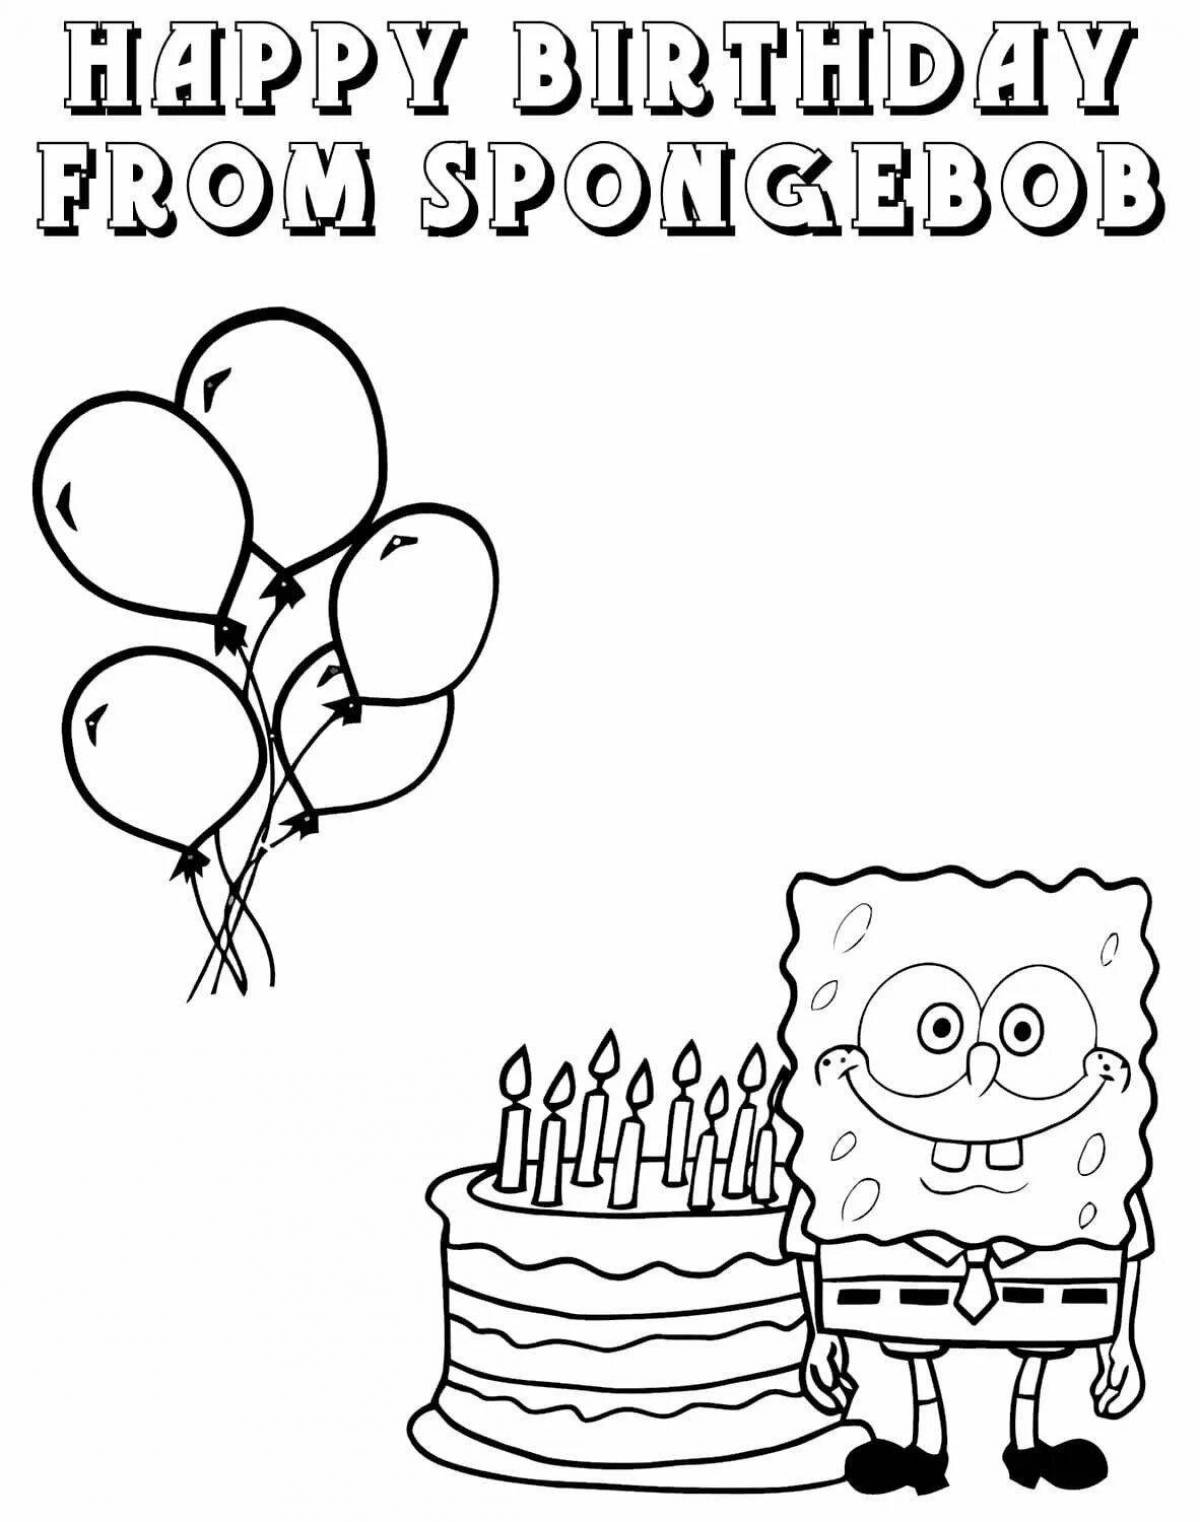 Sparkly happy birthday godmother coloring book